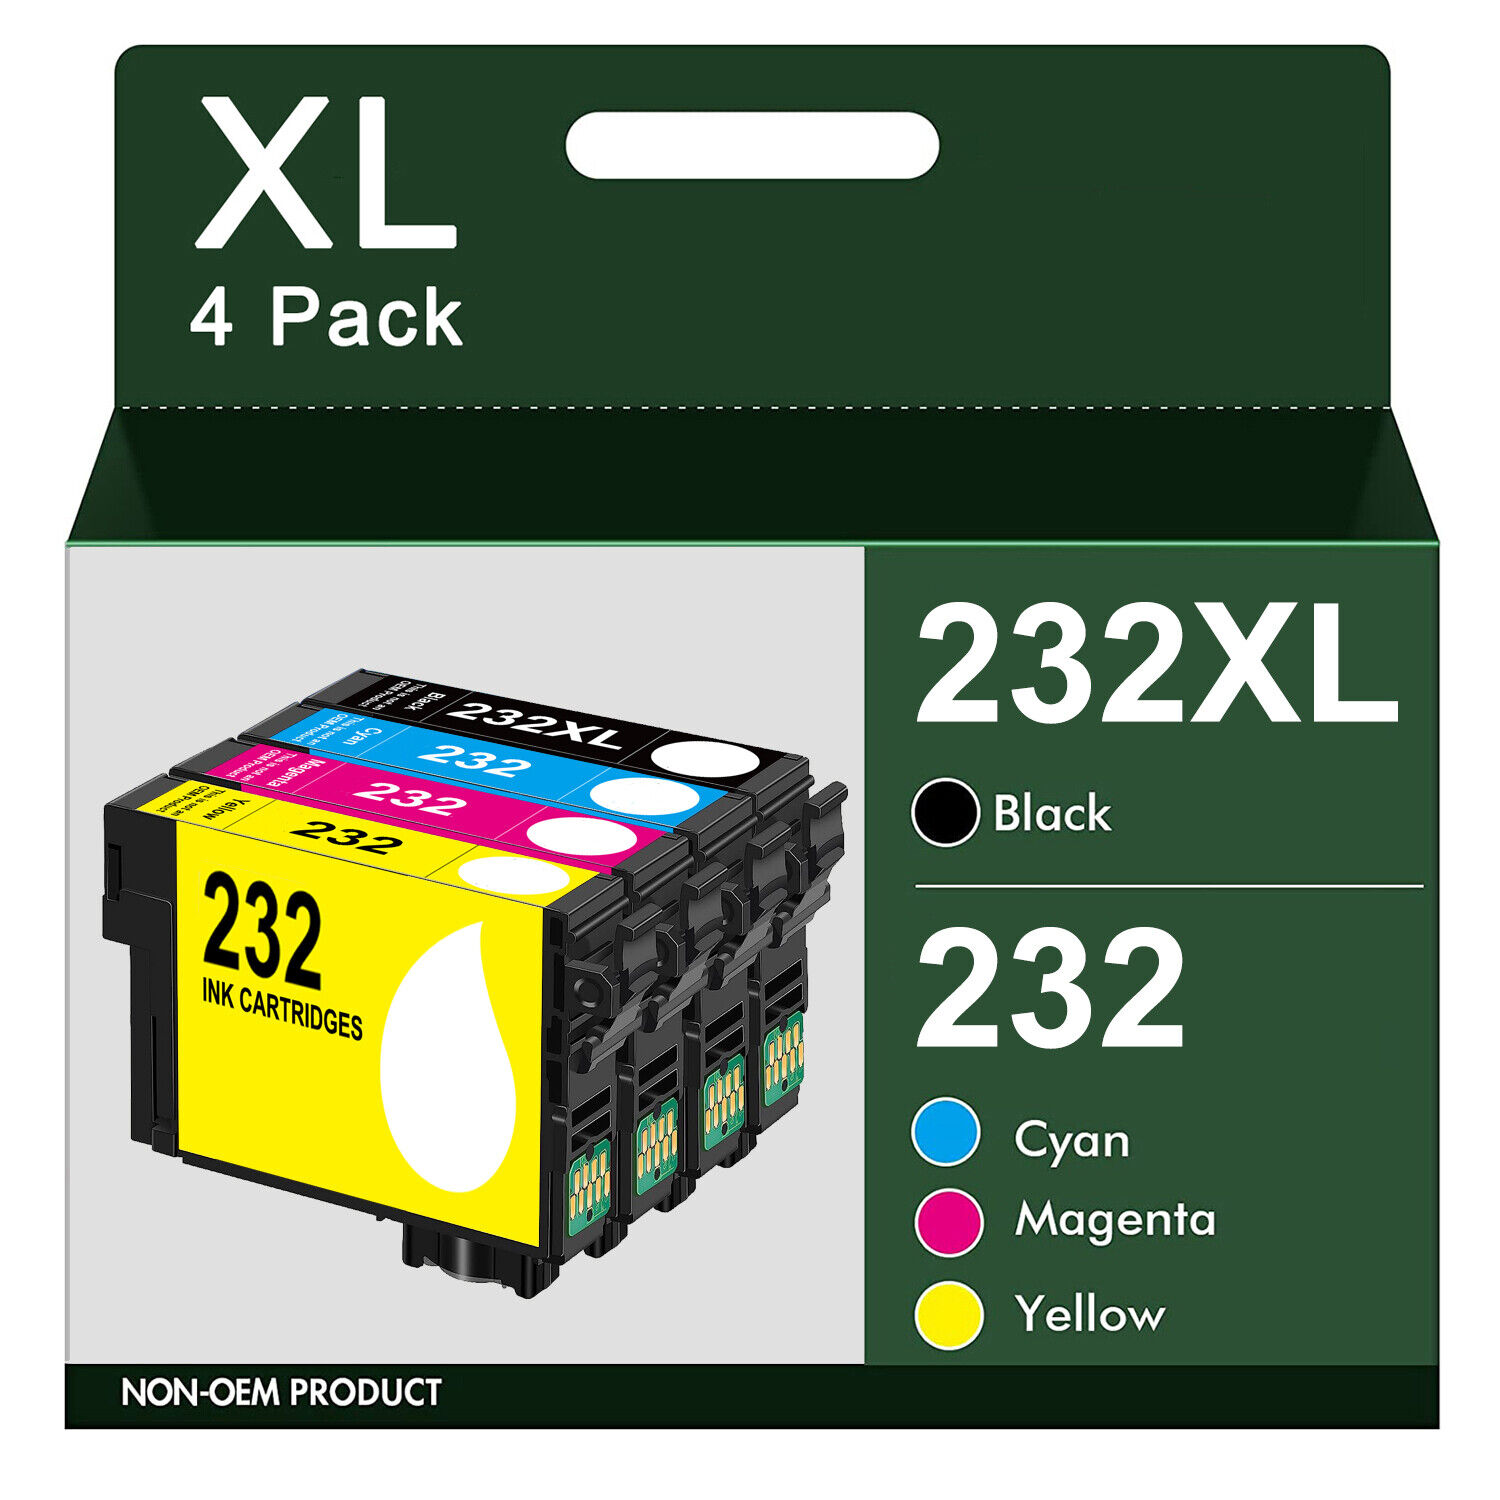 232XL Ink Cartridges for 232 Ink Cartridges for XP-4200 XP-4205 WF-2930 WF-2950